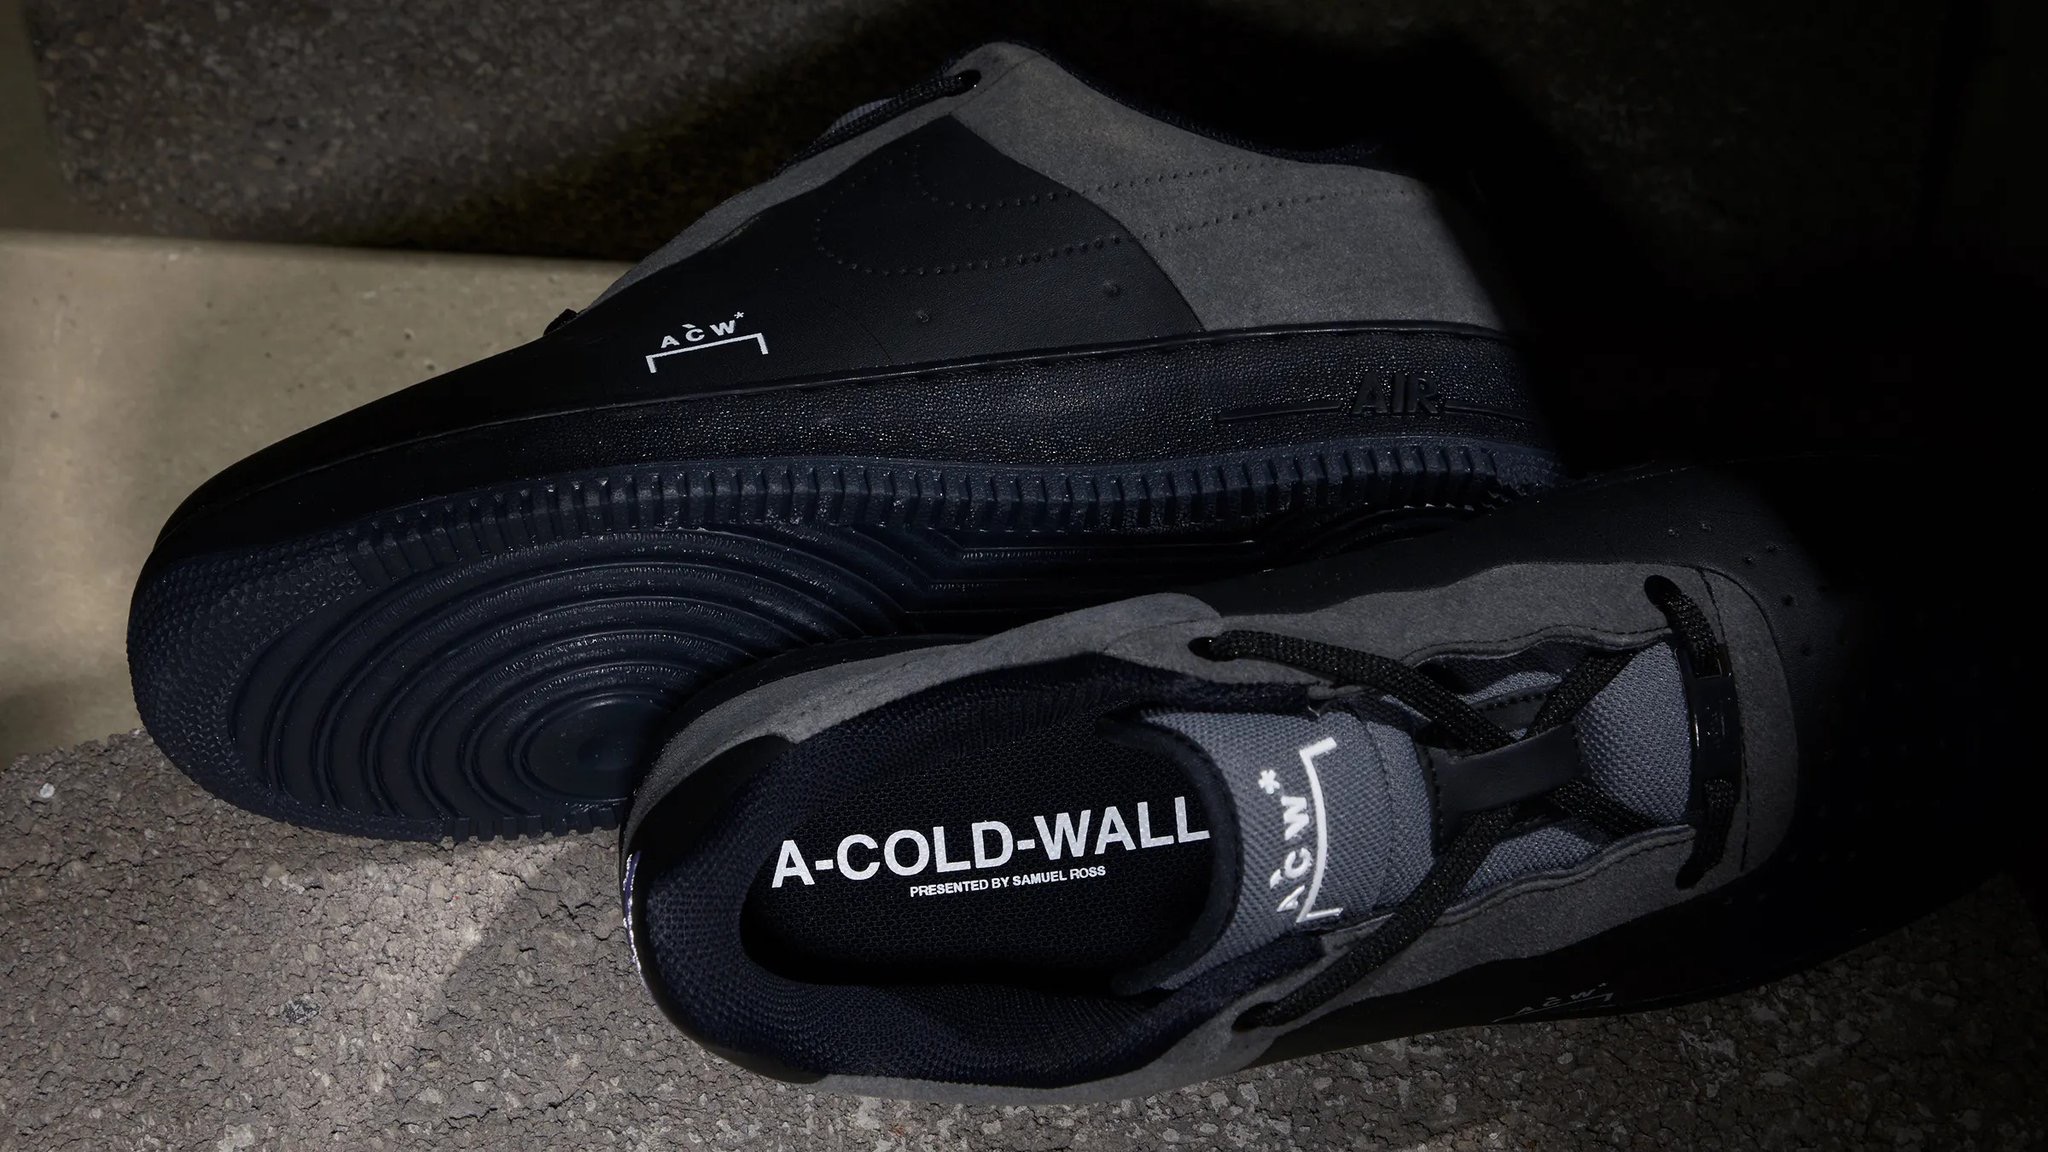 A-COLD-WALL x NIKE AIR FORCE '07 / ACW